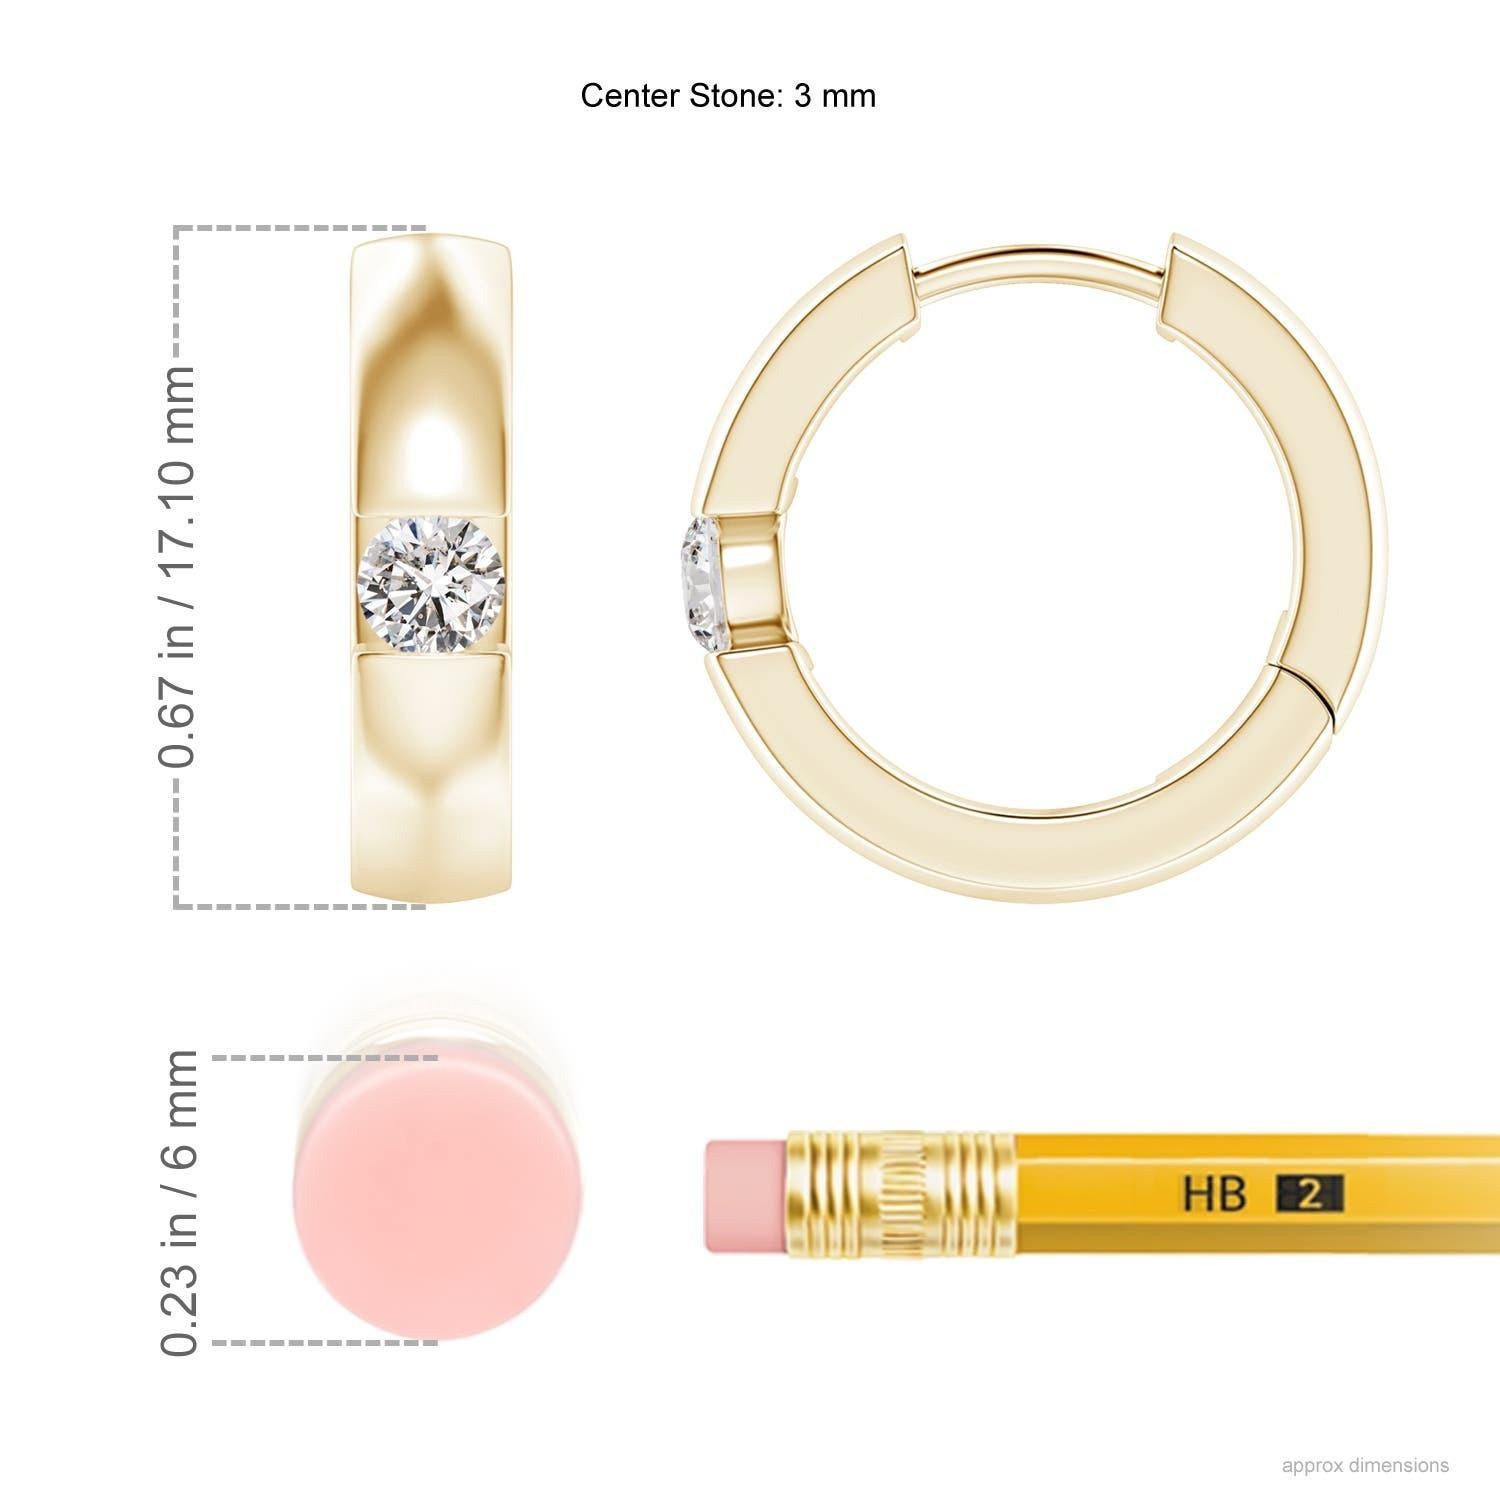 The hoops are studded with beautiful round diamonds in a channel setting. These diamond hinged hoop earrings are designed in 14k yellow gold and snugly hug your ears.
Diamond is the Birthstone for April and traditional gift for 10th wedding